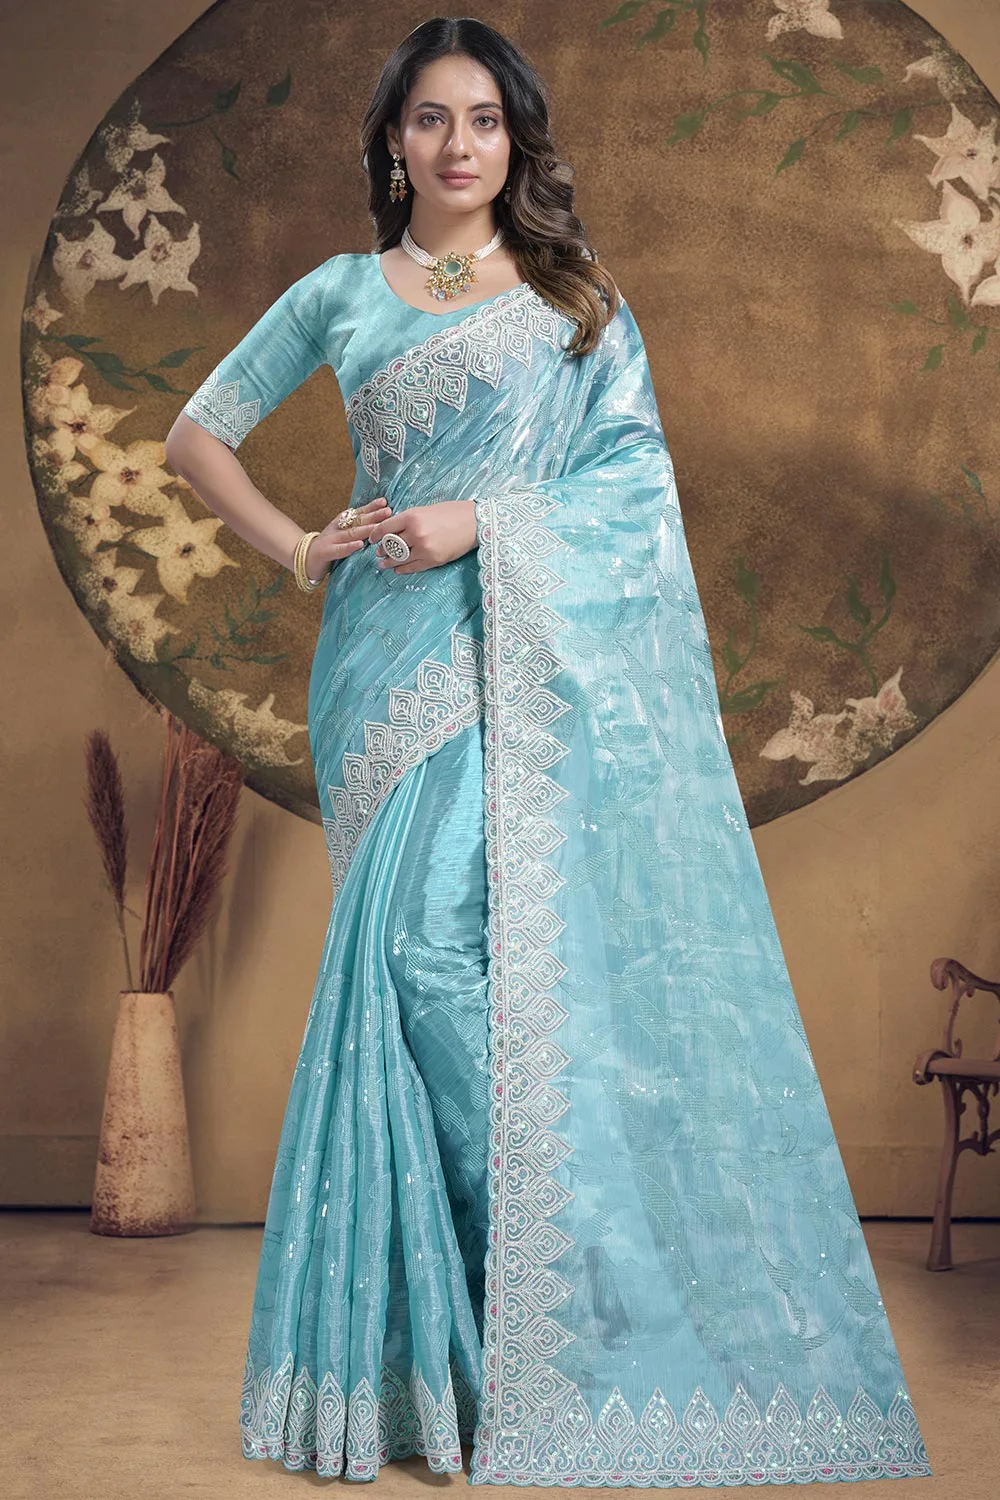 Sky Blue Silk Saree: Heavy Sequence Embroidered Work with Matching Blouse